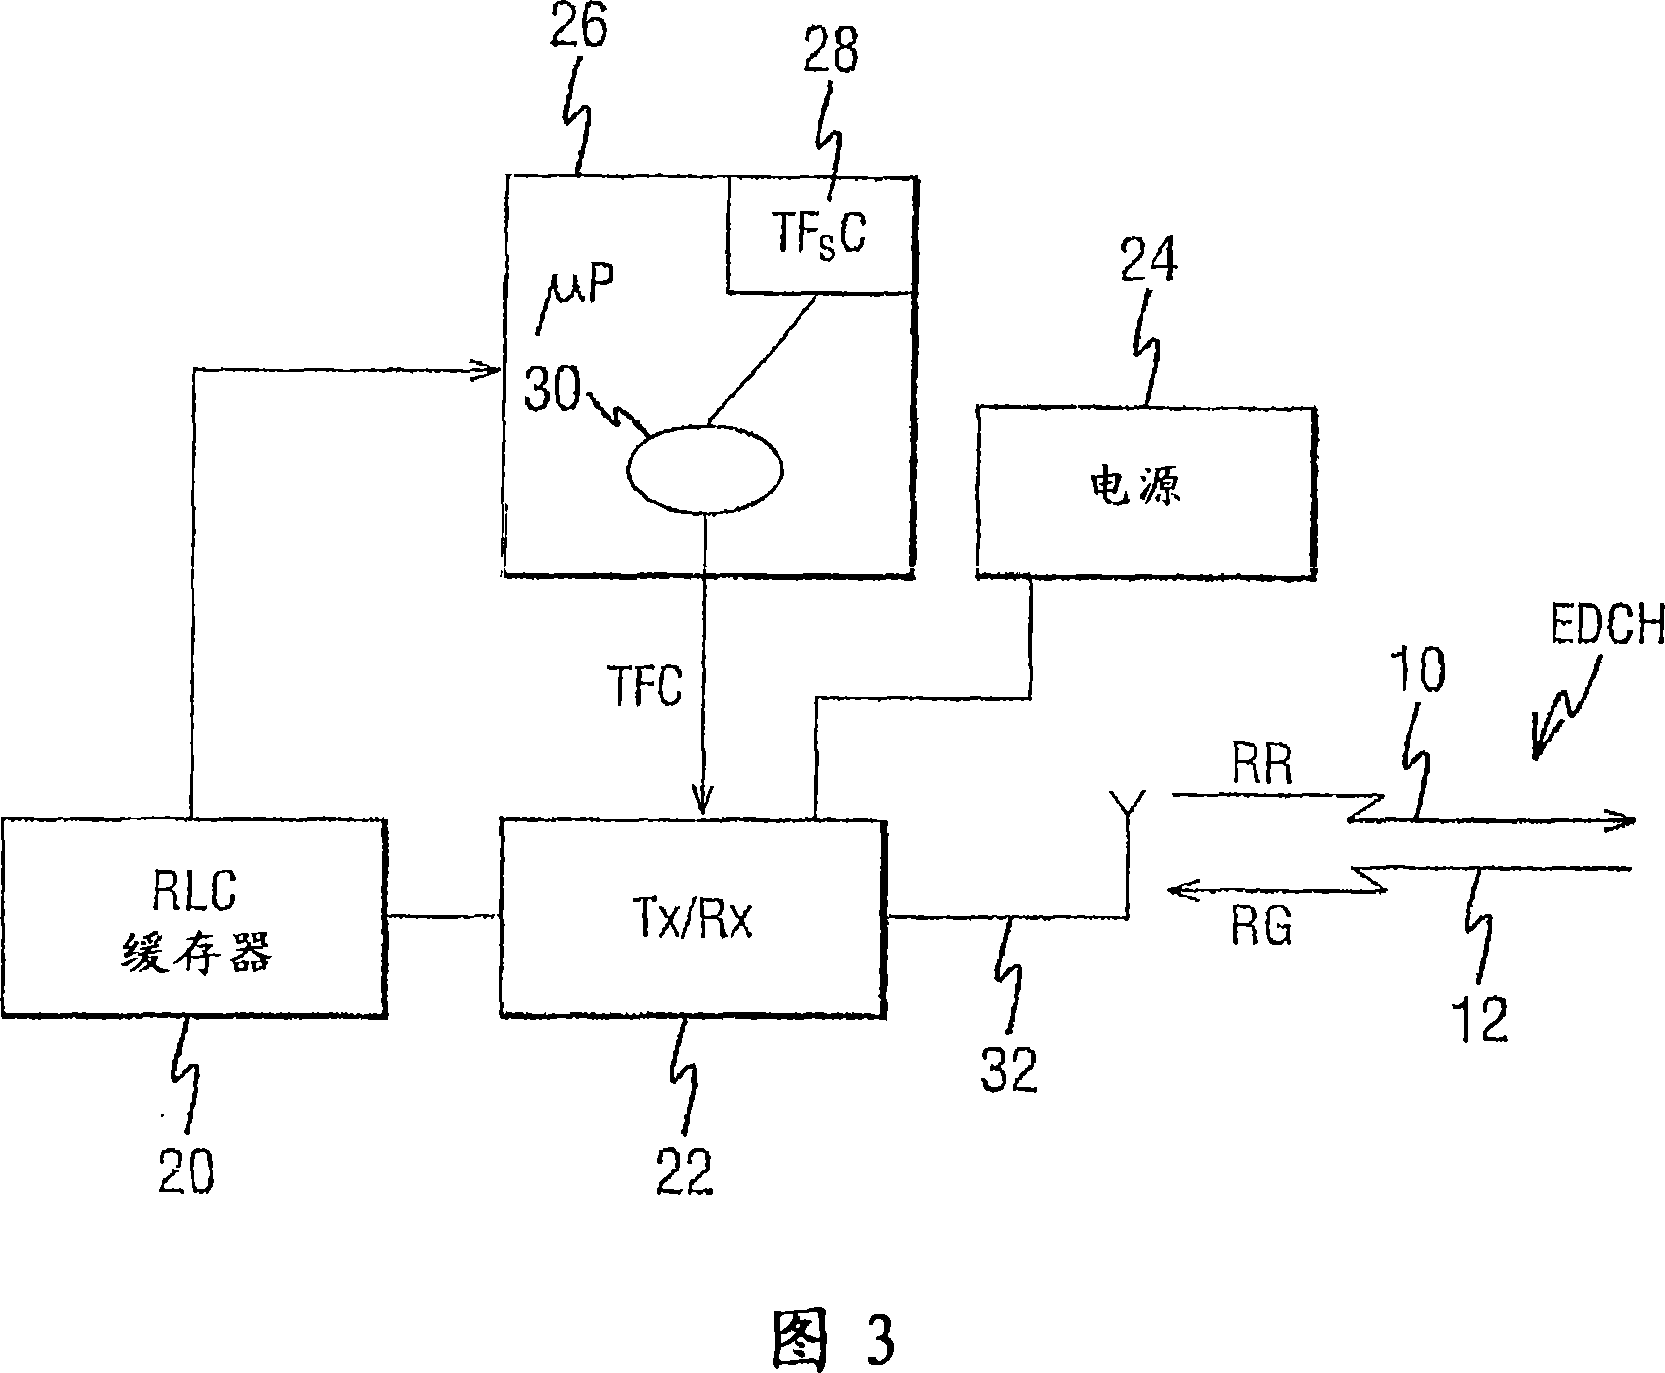 Scheduling data transmissions in a wireless communications network